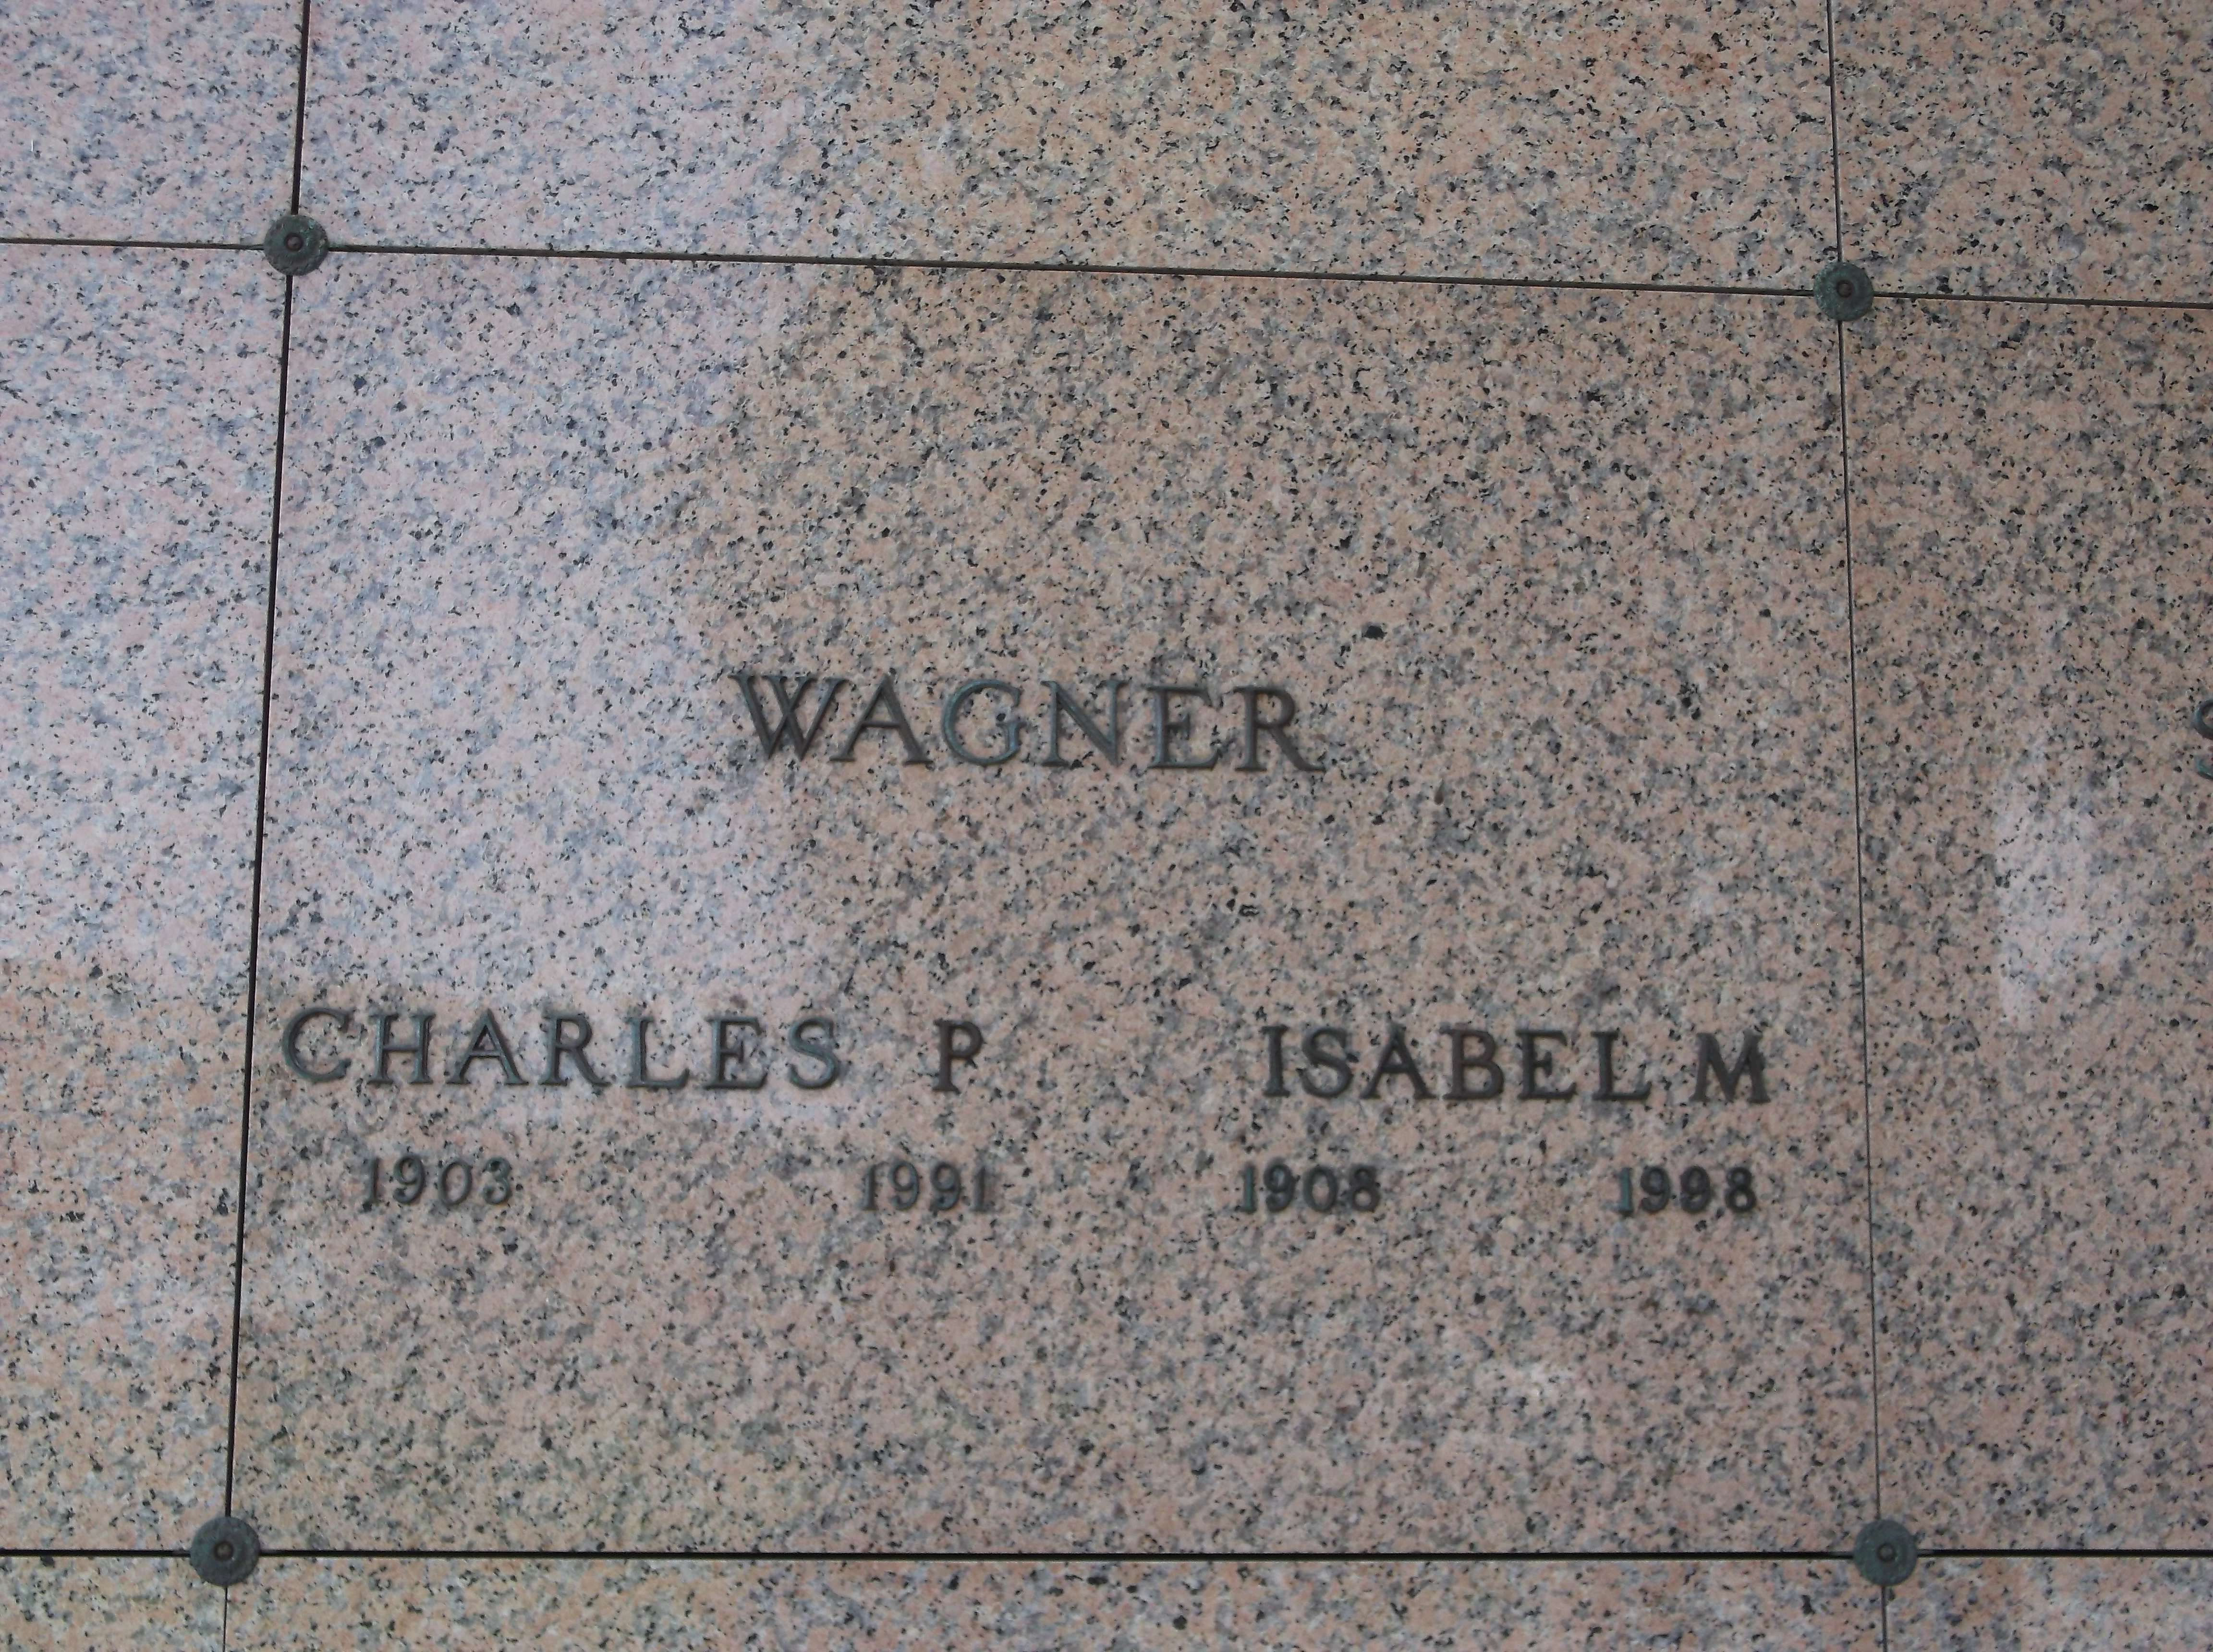 Charles P Wagner